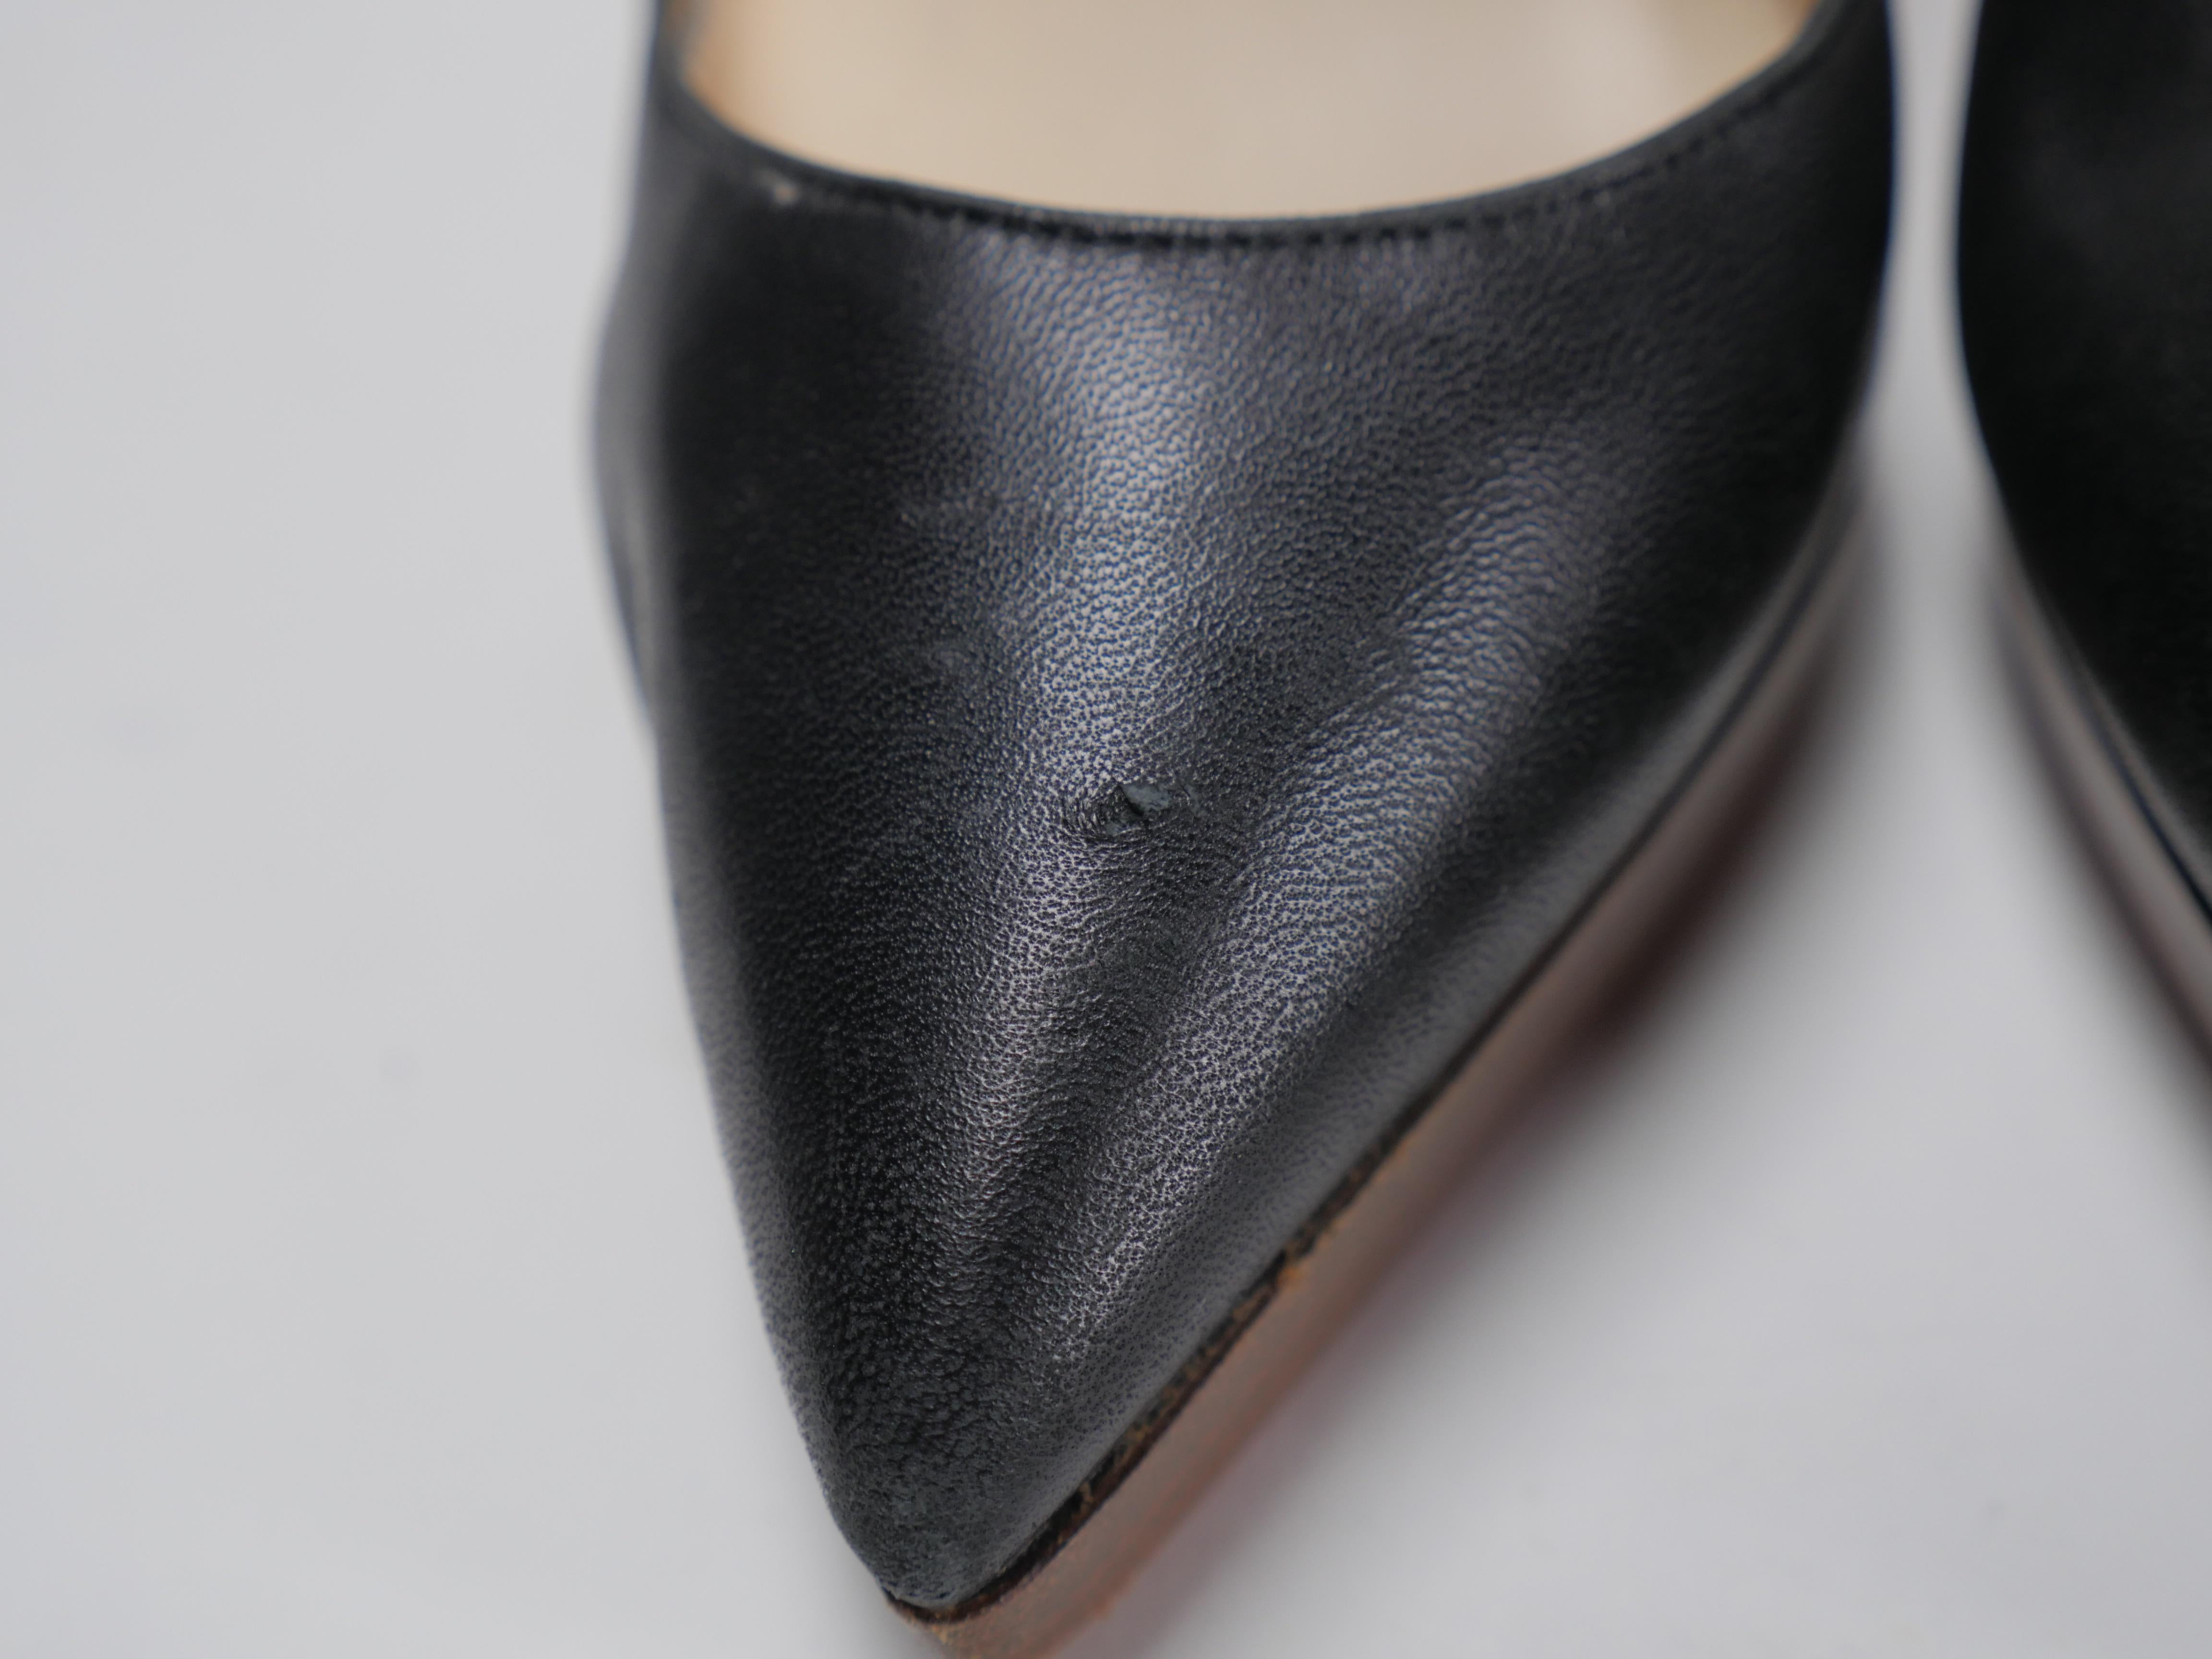 Women's or Men's Christian Louboutin Size 40 Classic Pointed Toed Black Leather Pumps